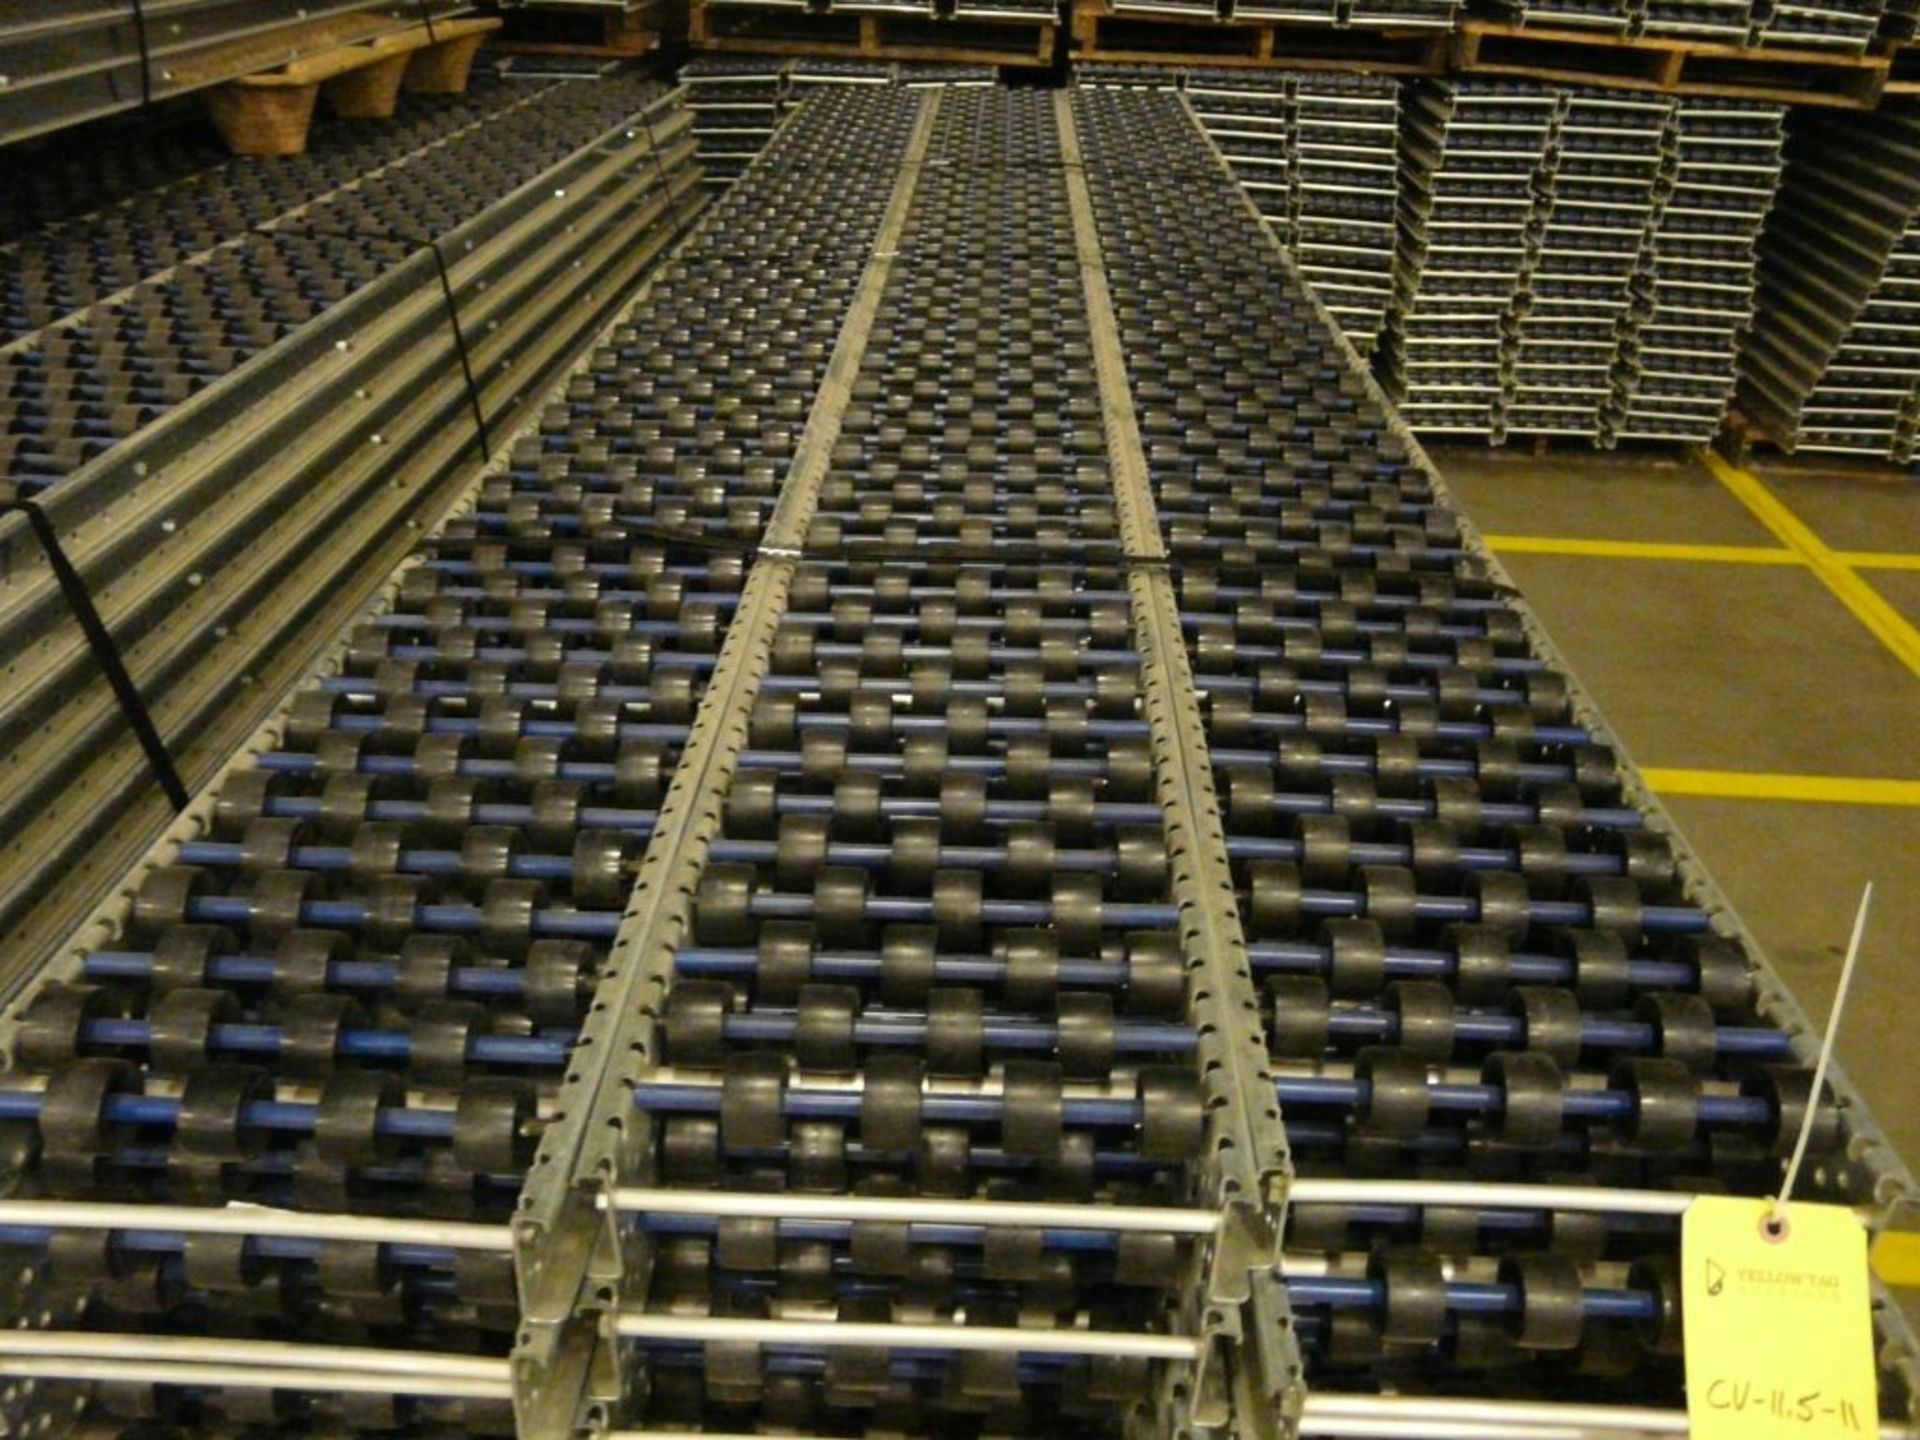 Lot of (90) SpanTrack Wheelbed Carton Flow Conveyors - 11.5'L x 11"W; Tag: 223578 - $30 Lot - Image 3 of 4